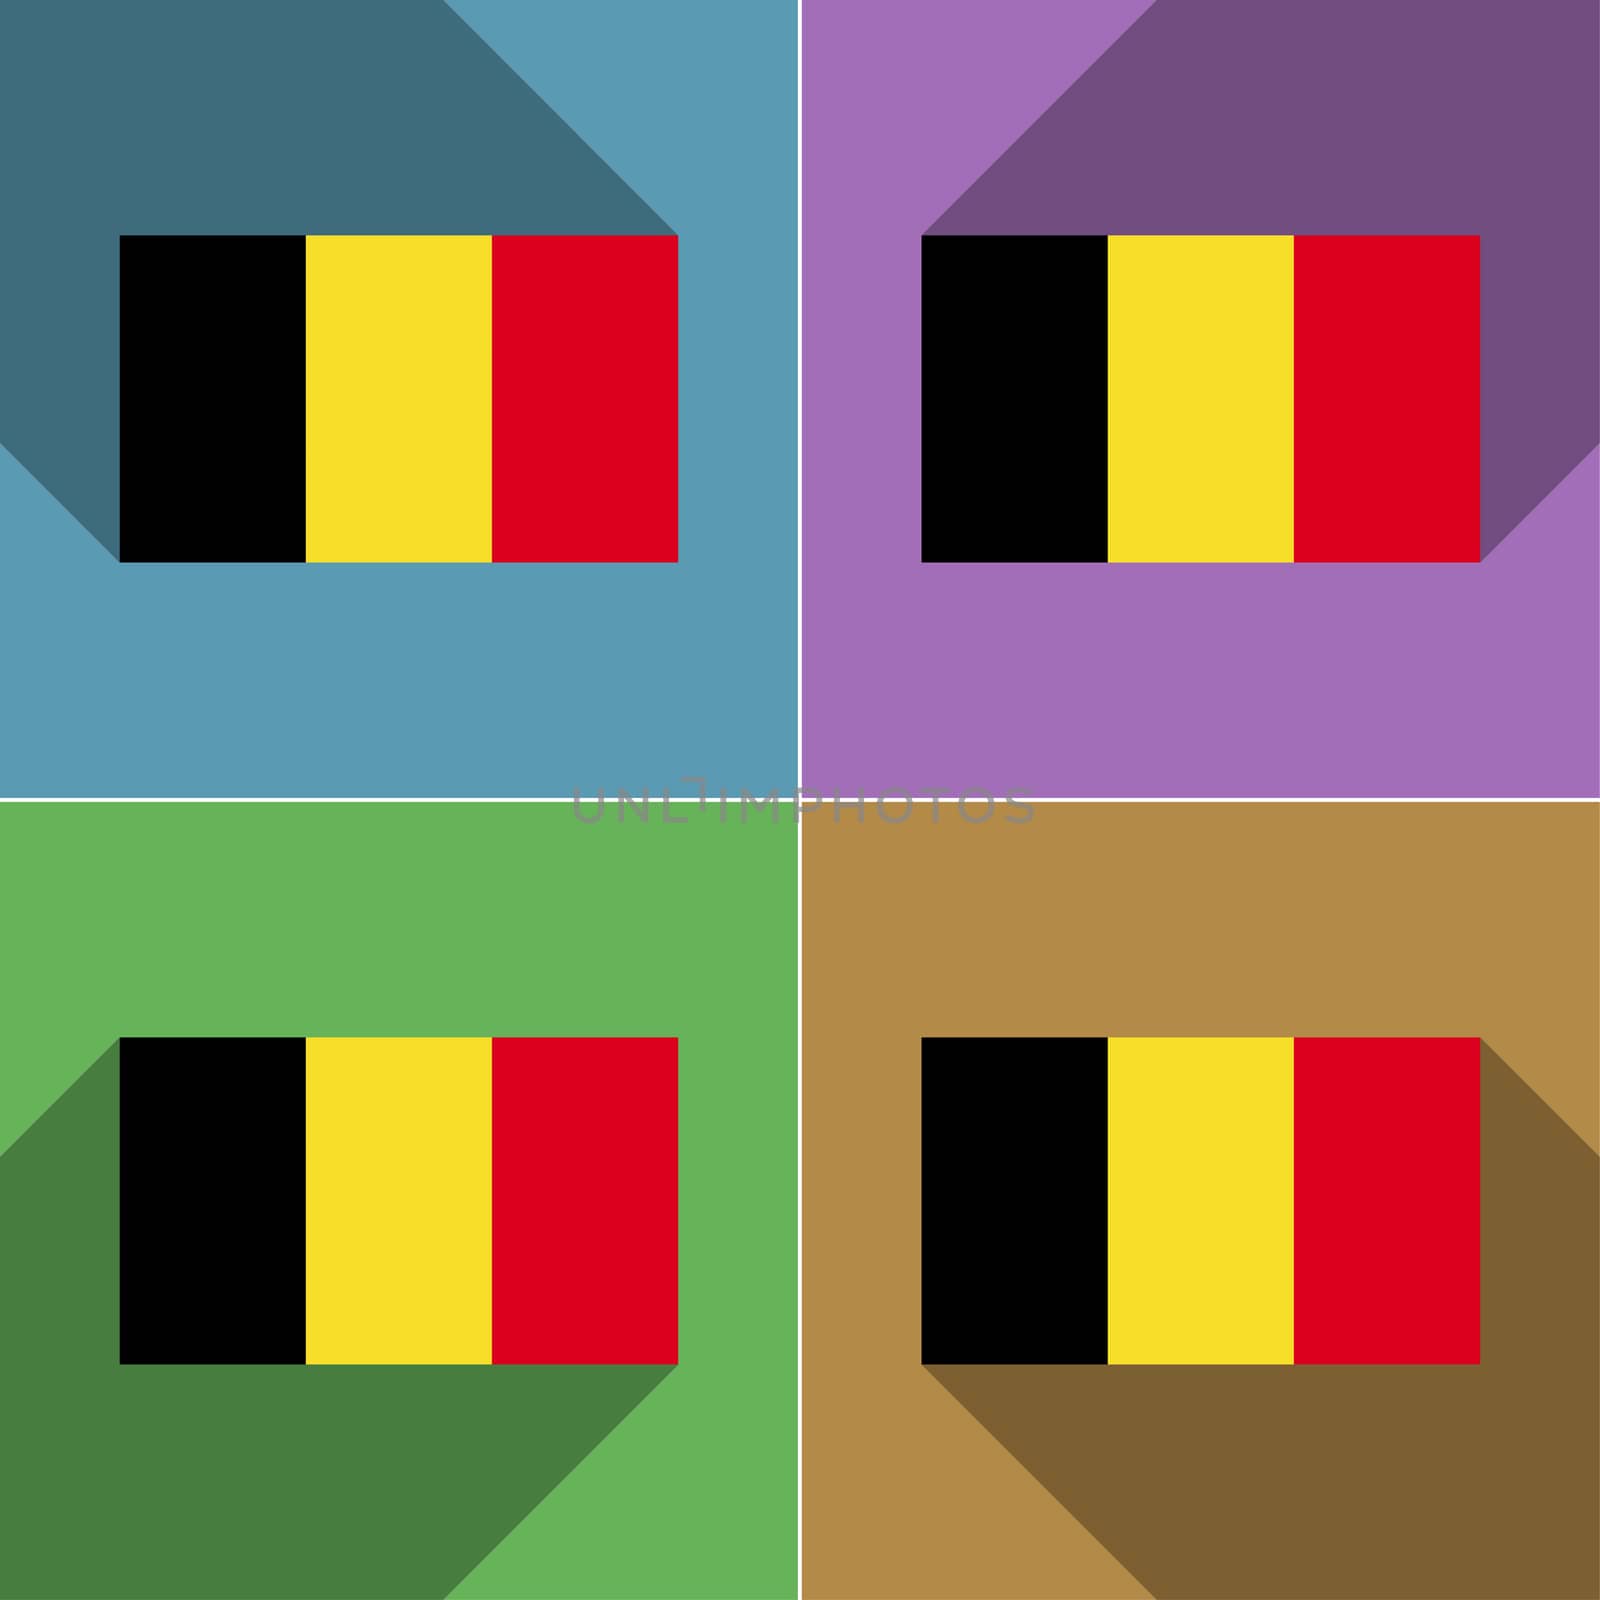 Flags of Belgium. Set of colors flat design and long shadows.  illustration